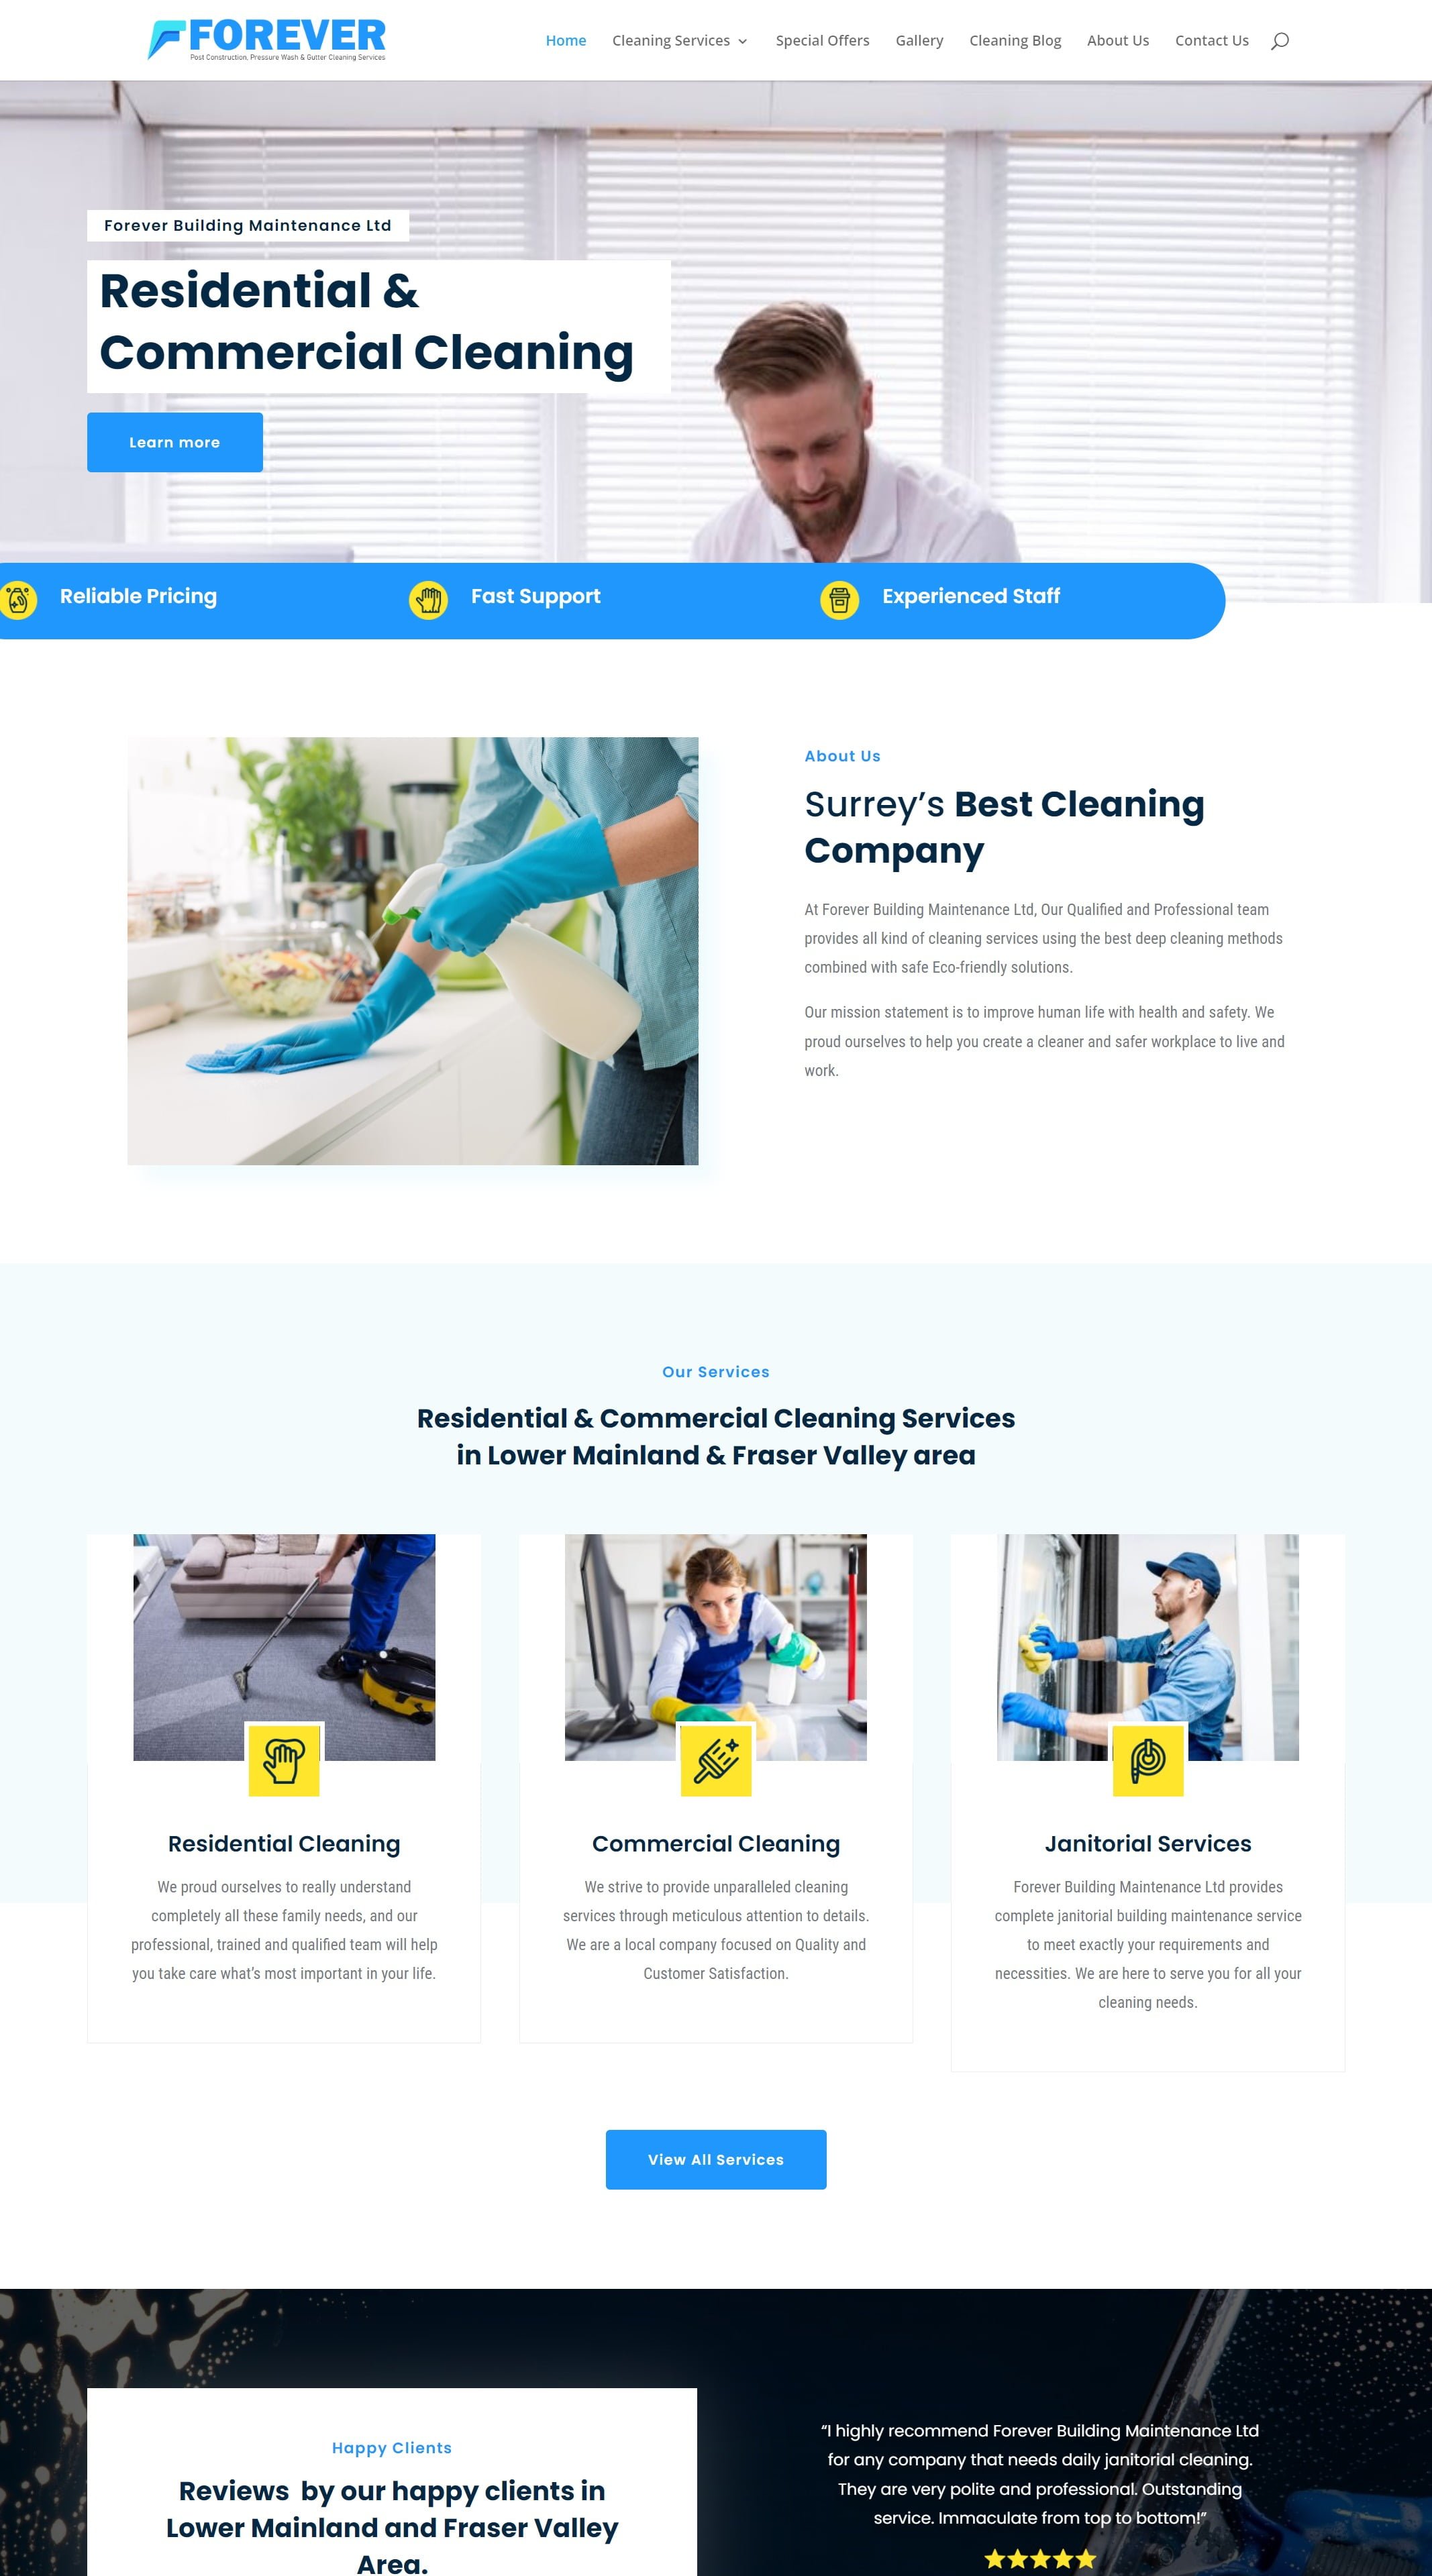 FBM Cleaning Services - Cleaning Services